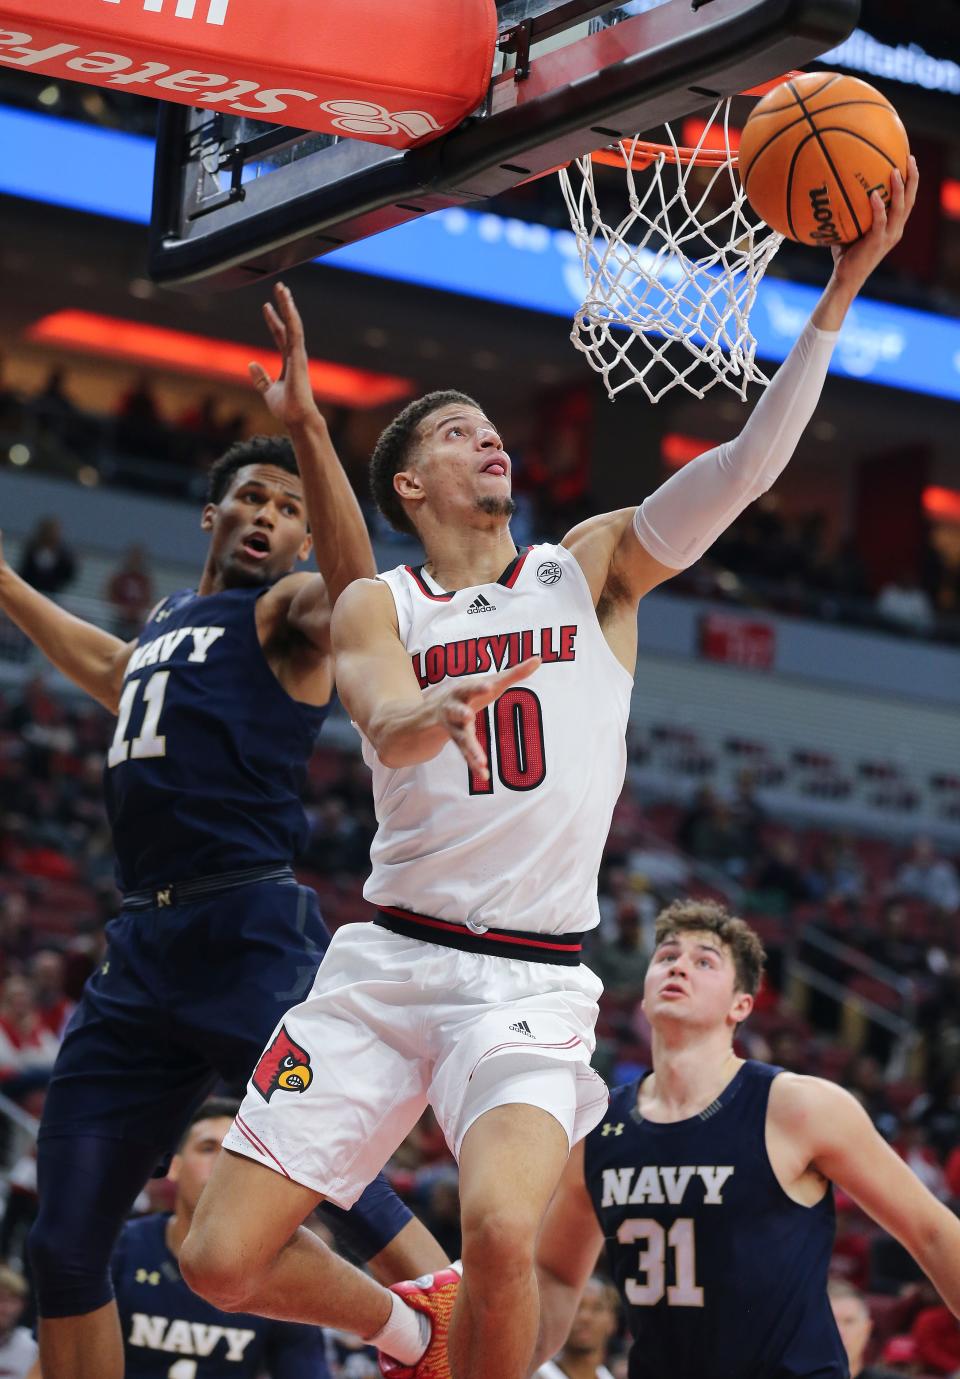 U of L's Samuell Williamson (10) hits a reverse layup against Navy during their game at the Yum Center in Louisville, Ky. on Nov. 15, 2021.